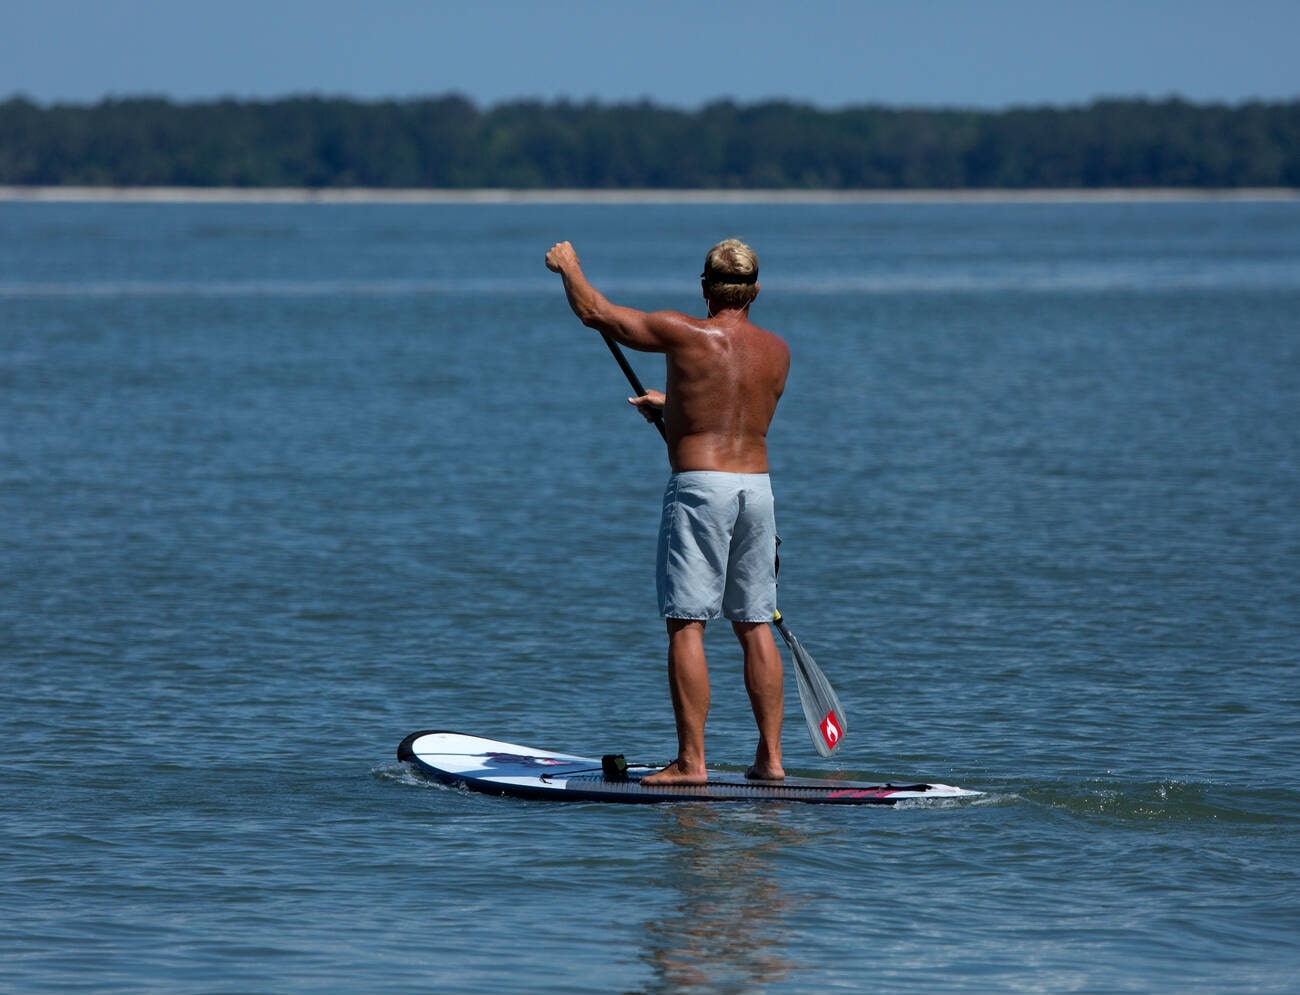 stand-up-paddle-boarding